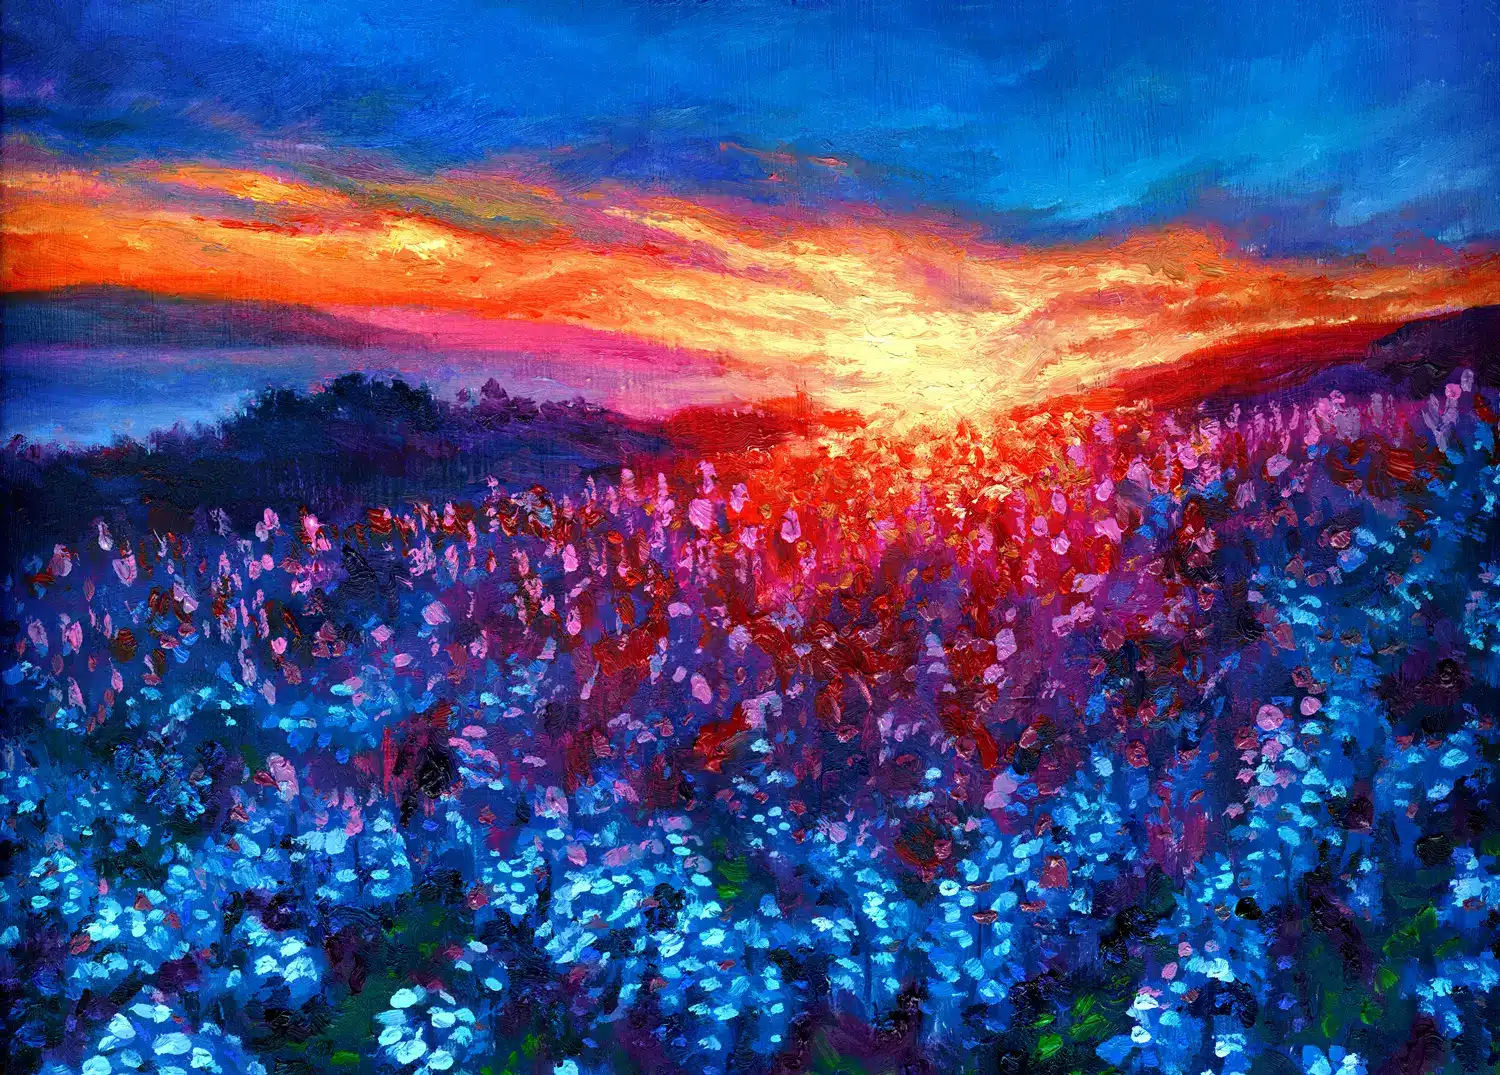 Blue lupine sunset by Julie McCormick - a vibrant oil painting capturing the beauty of a sunset with blue lupine flowers in the foreground